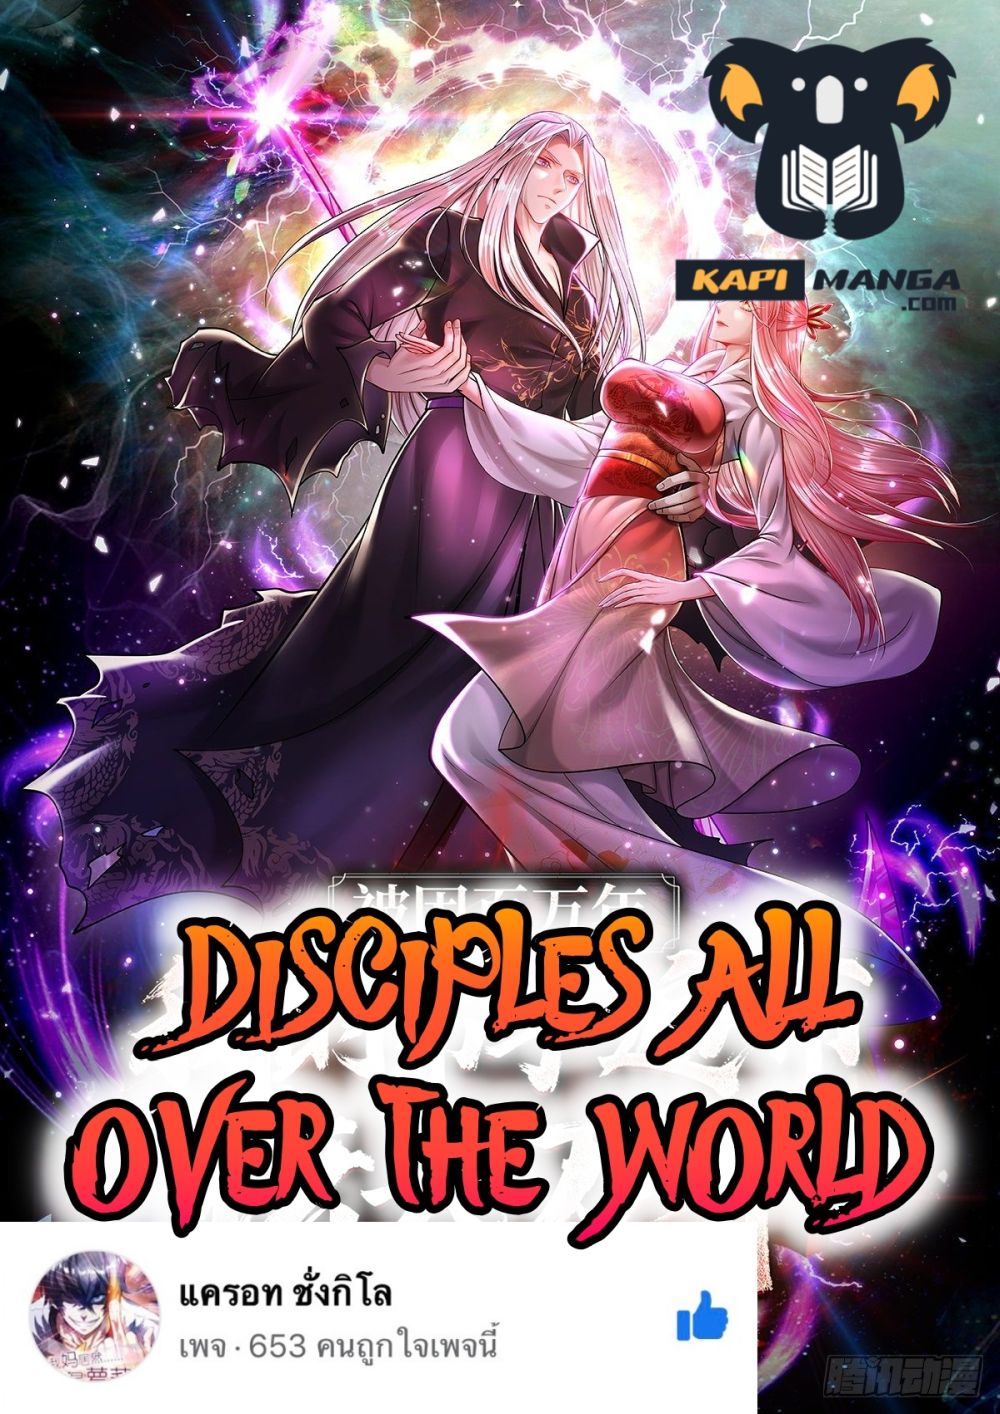 Disciples All Over the World à¸à¸­à¸à¸à¸µà¹ 48 (1)